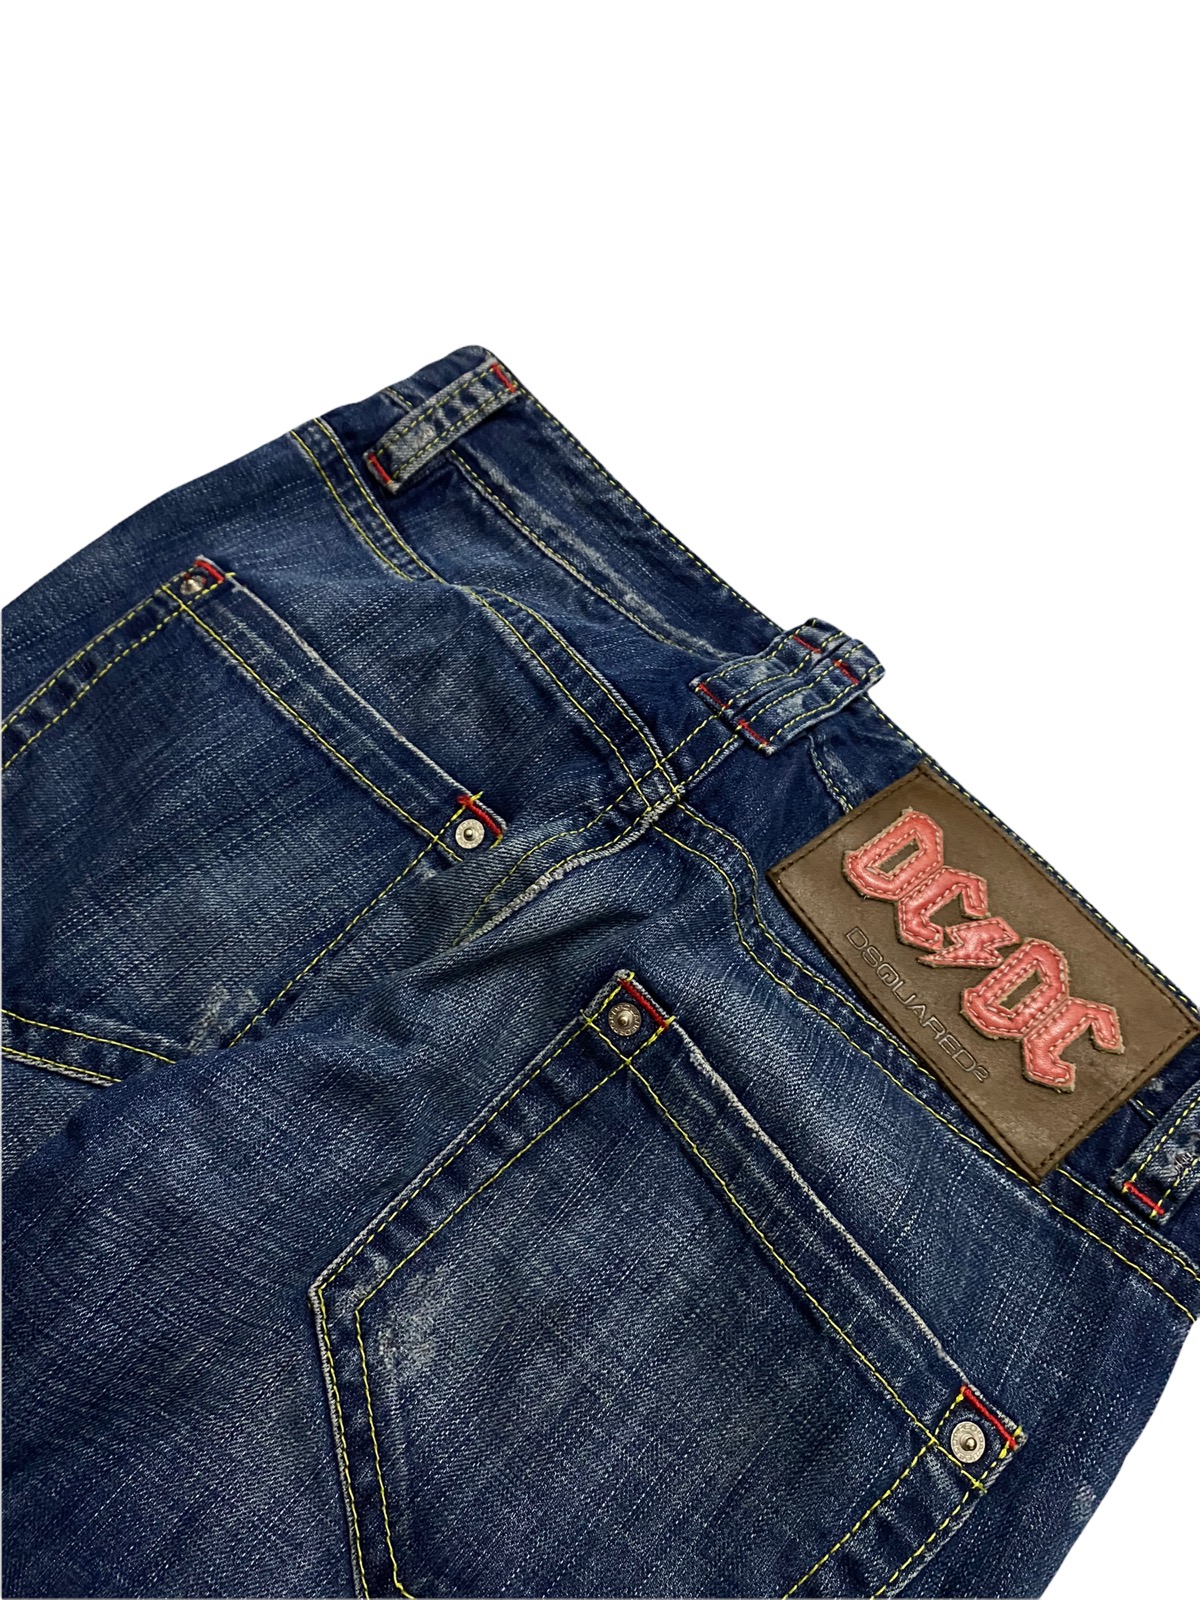 Dsquared2 ACDC Parody Fucker Made in Italy Jeans - 13